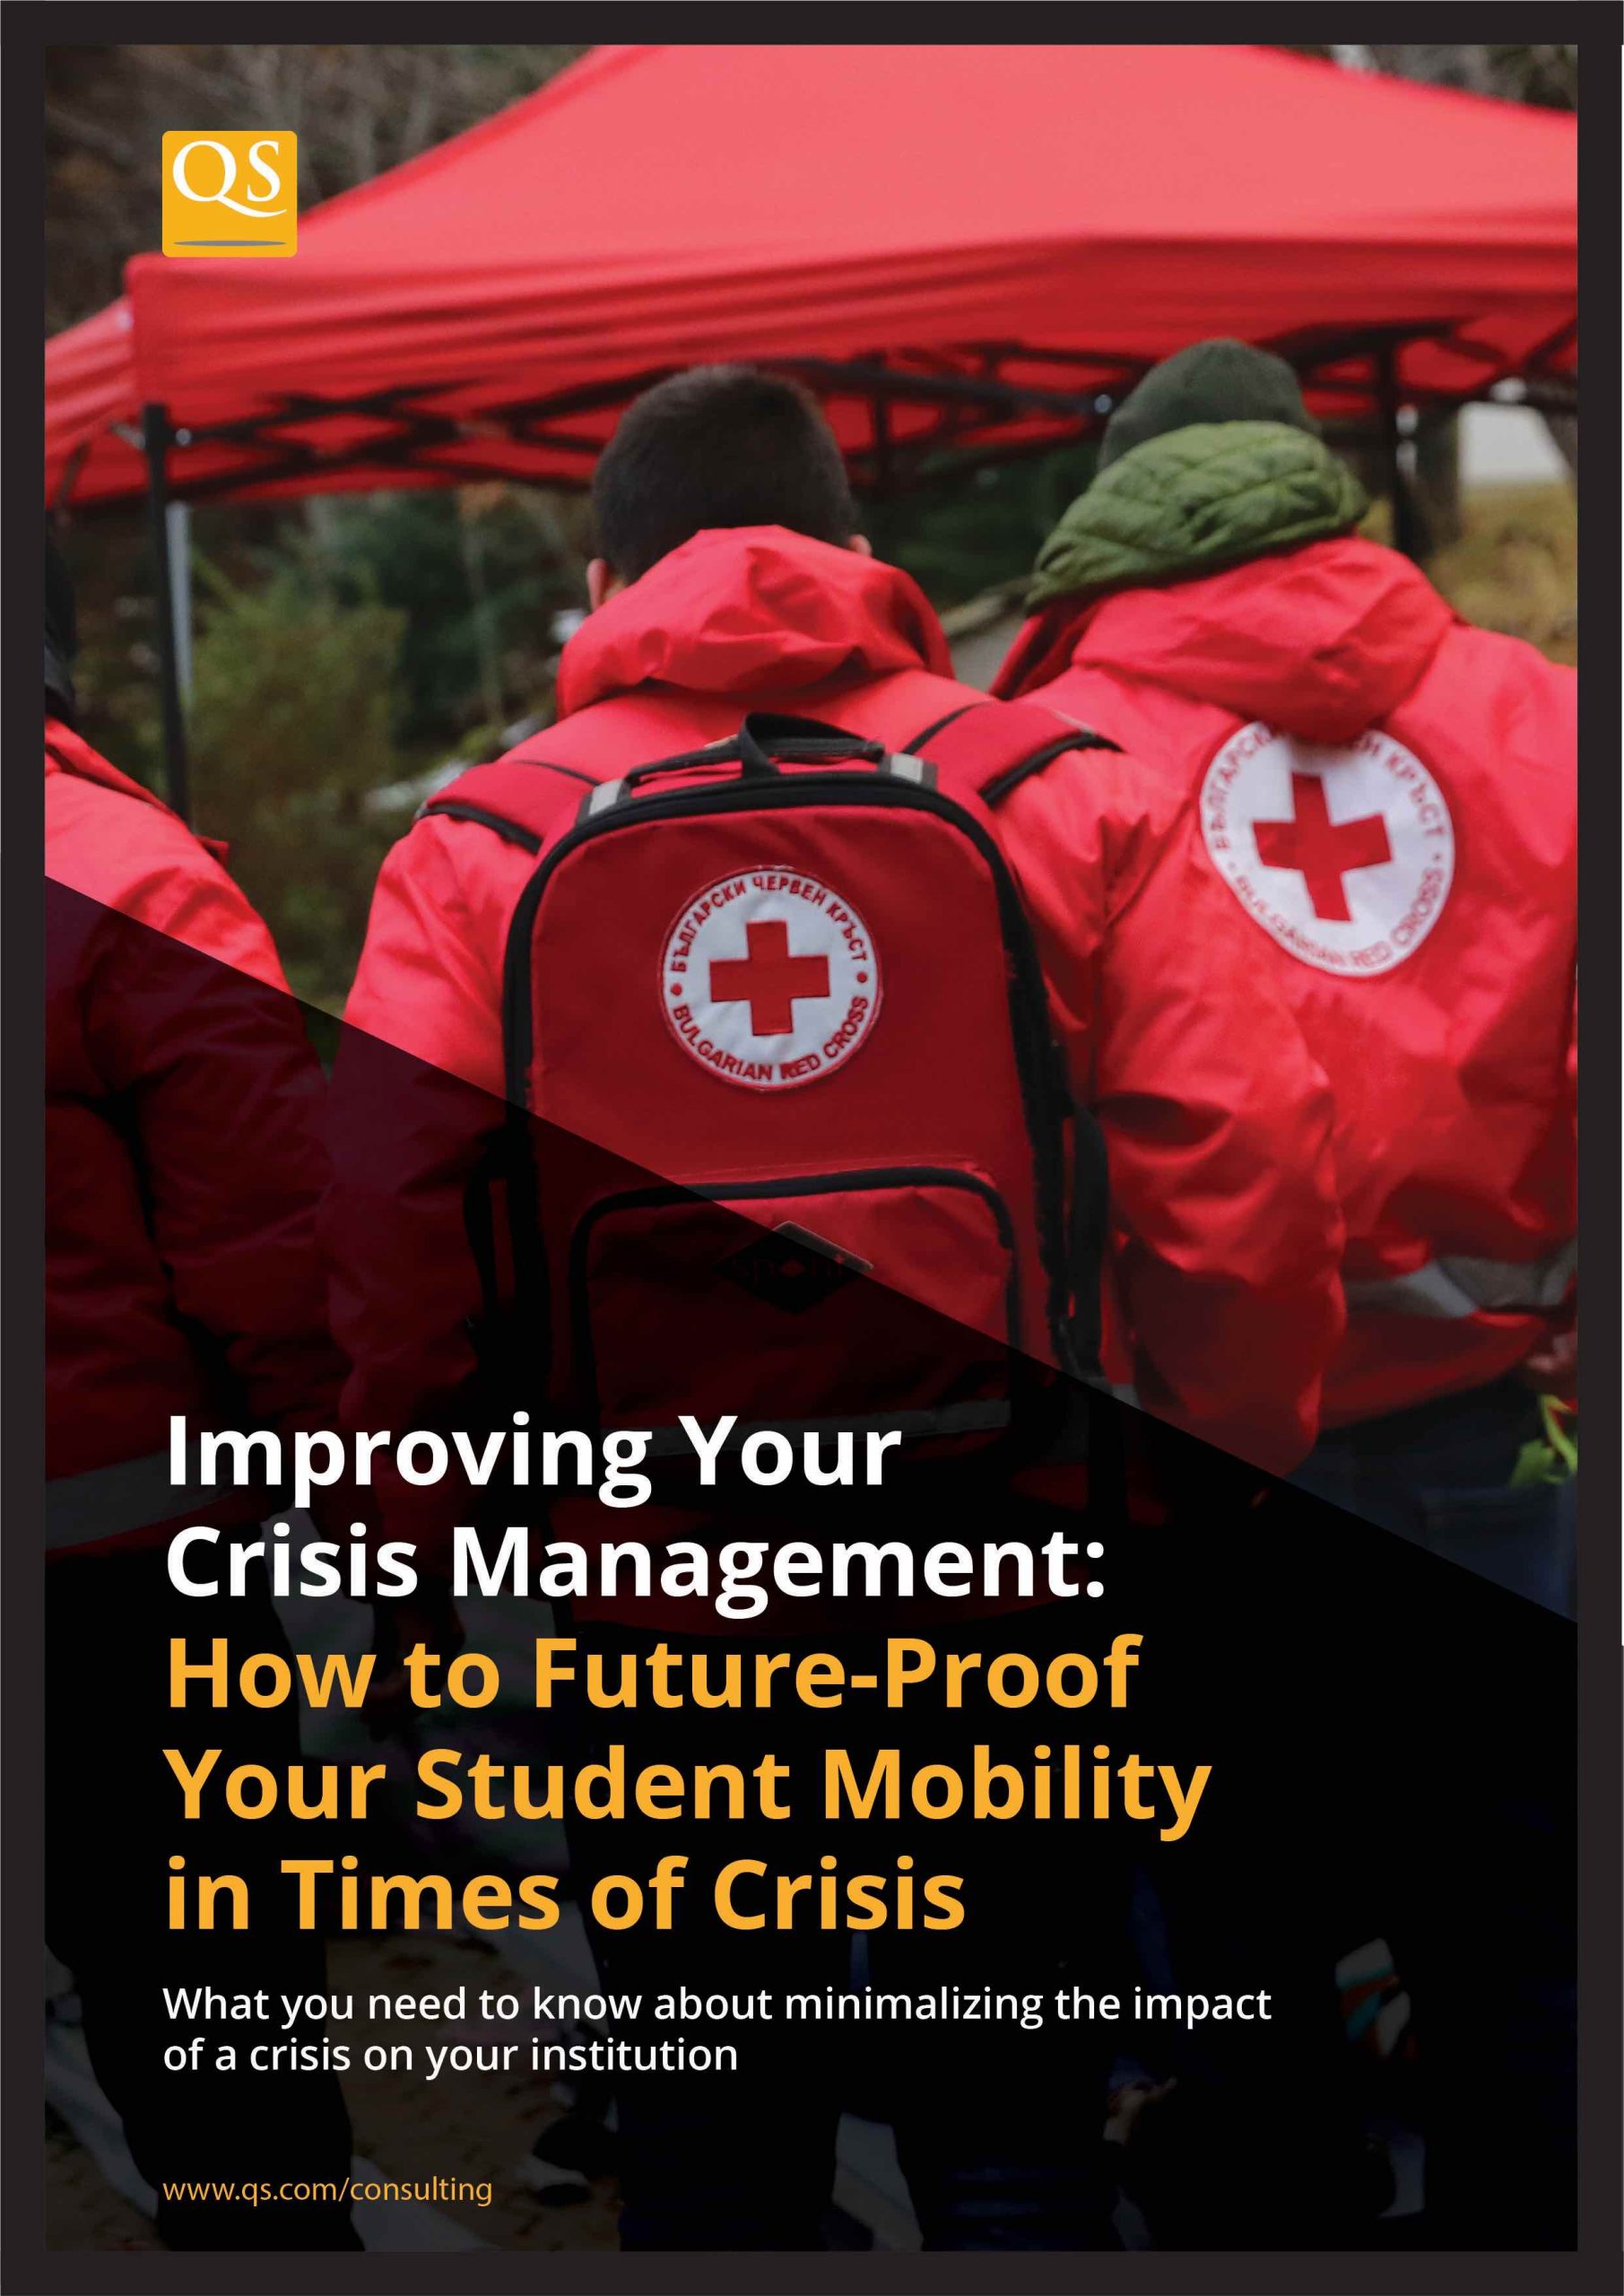 improve-your-crisis-management-how-to-future-proof-your-student-mobility-in-times-of-crisis